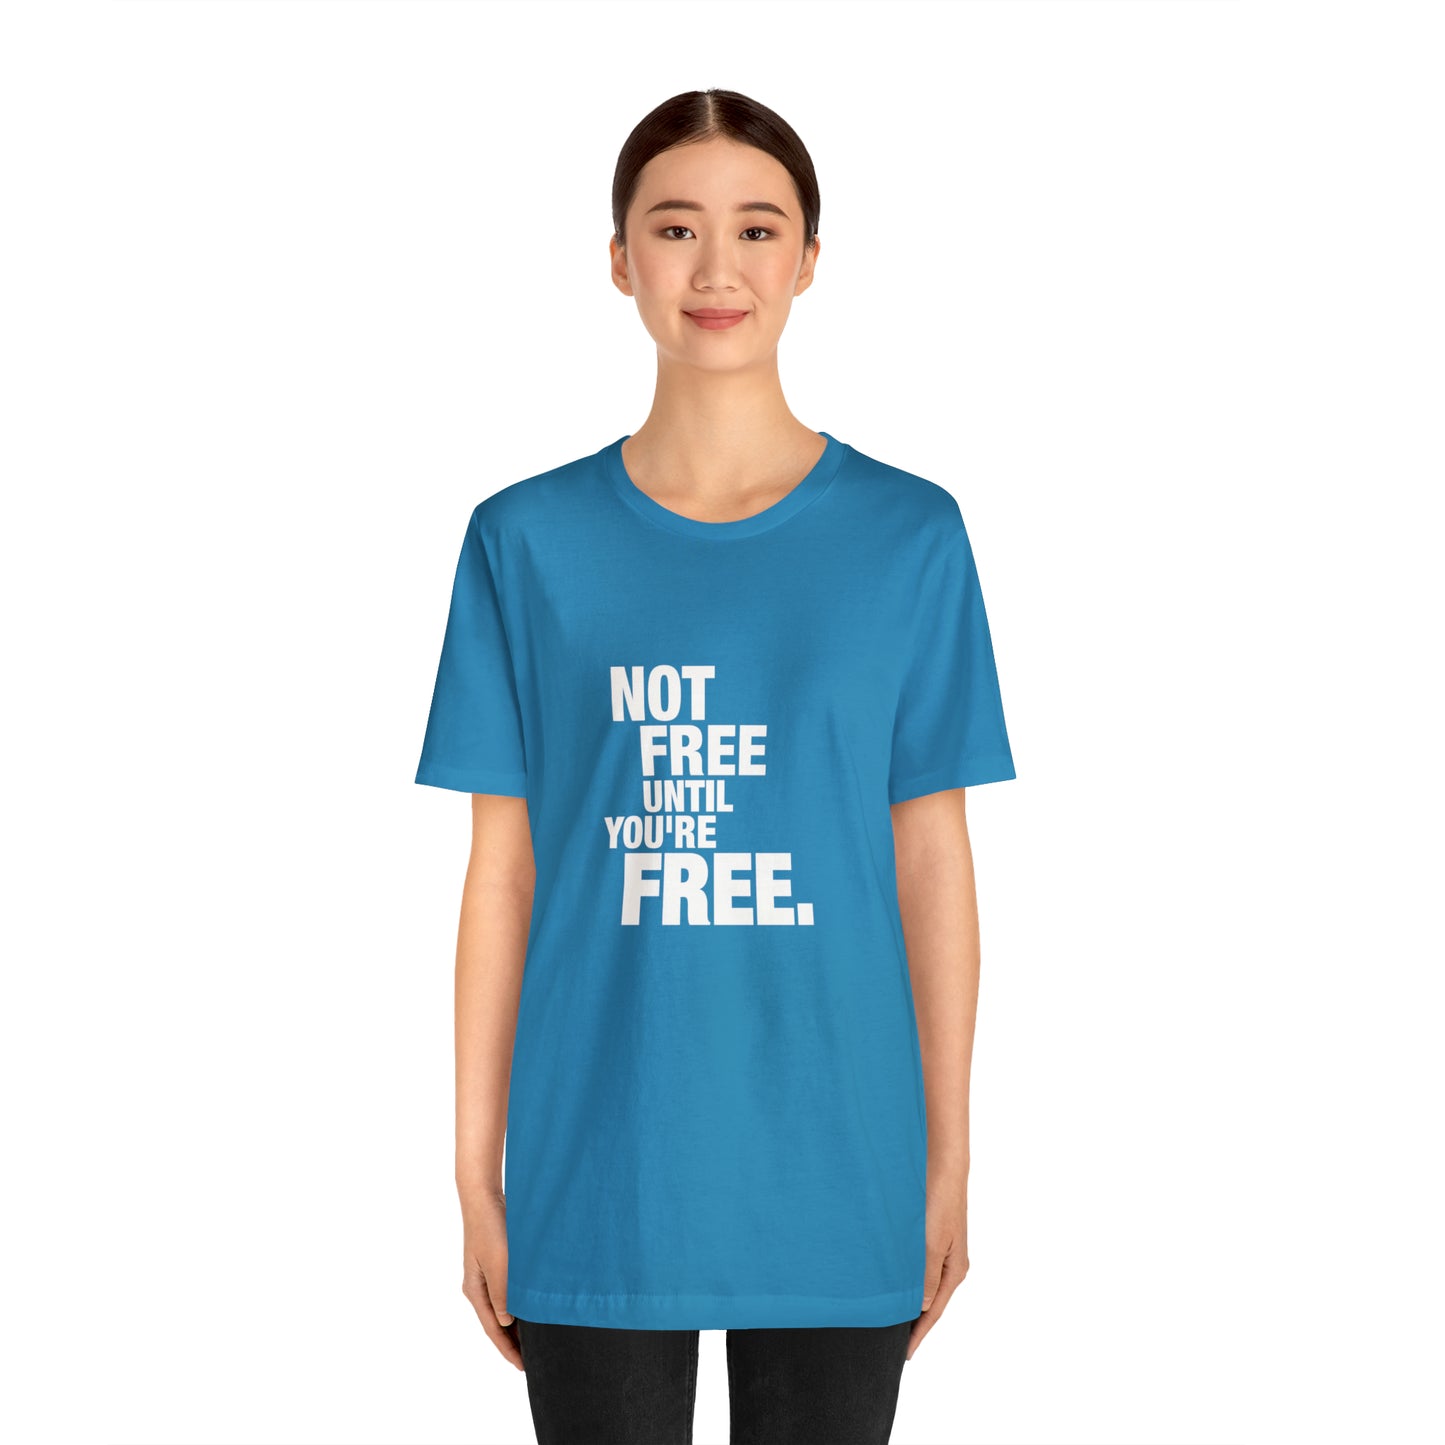 Not Free Until You're Free [T-Shirt]